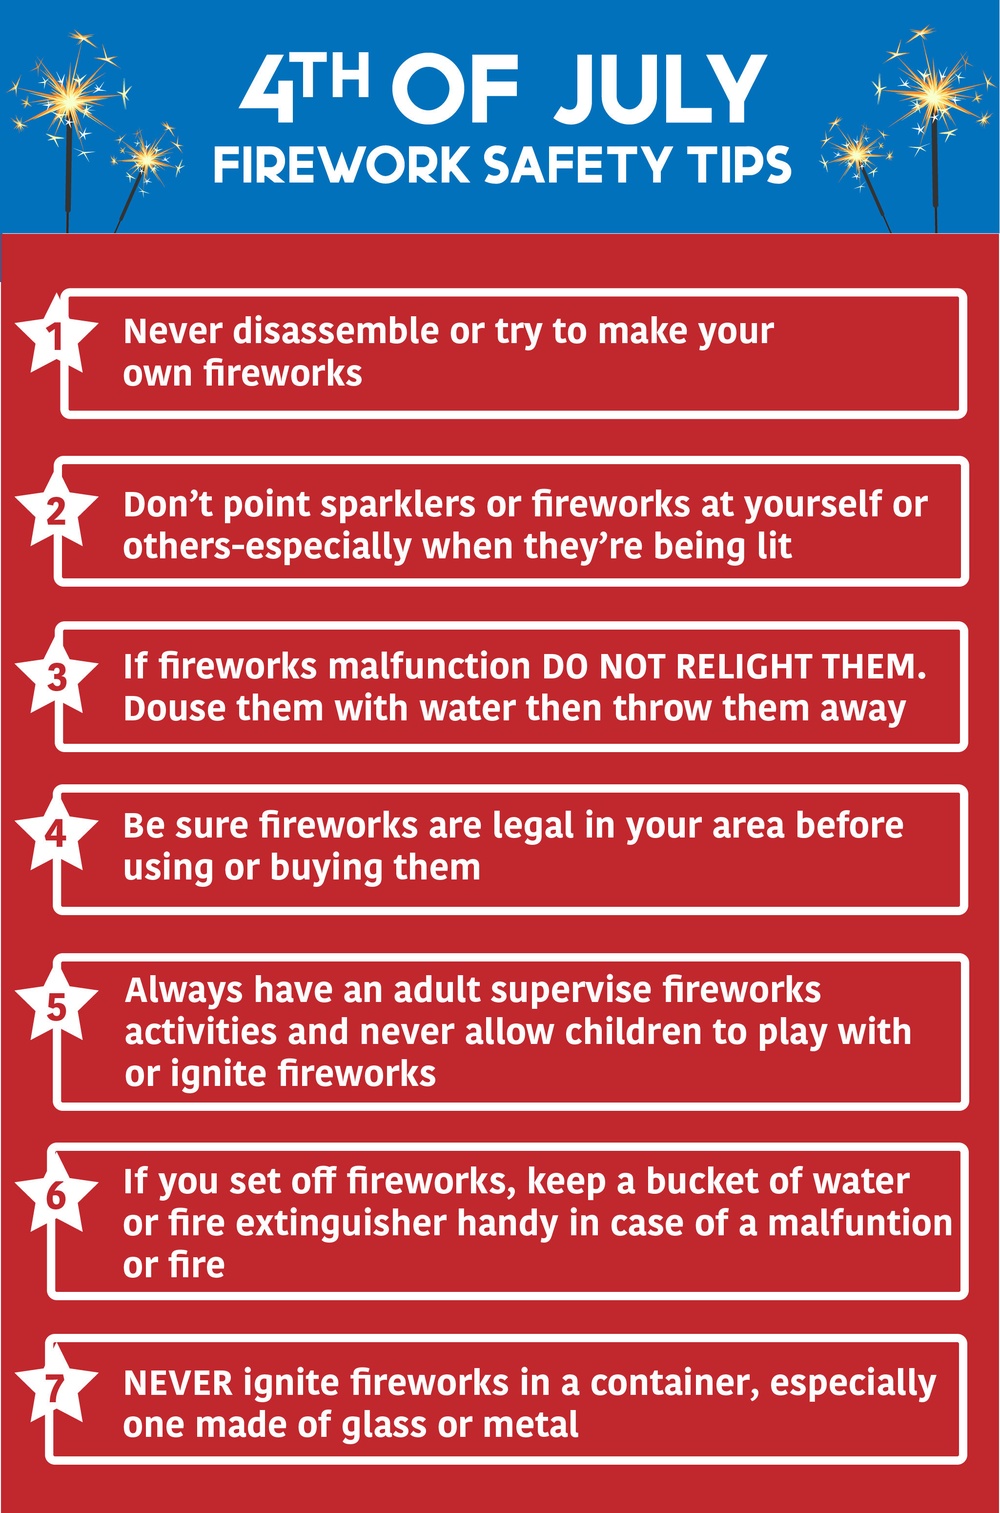 4th of July Firework Safety tips